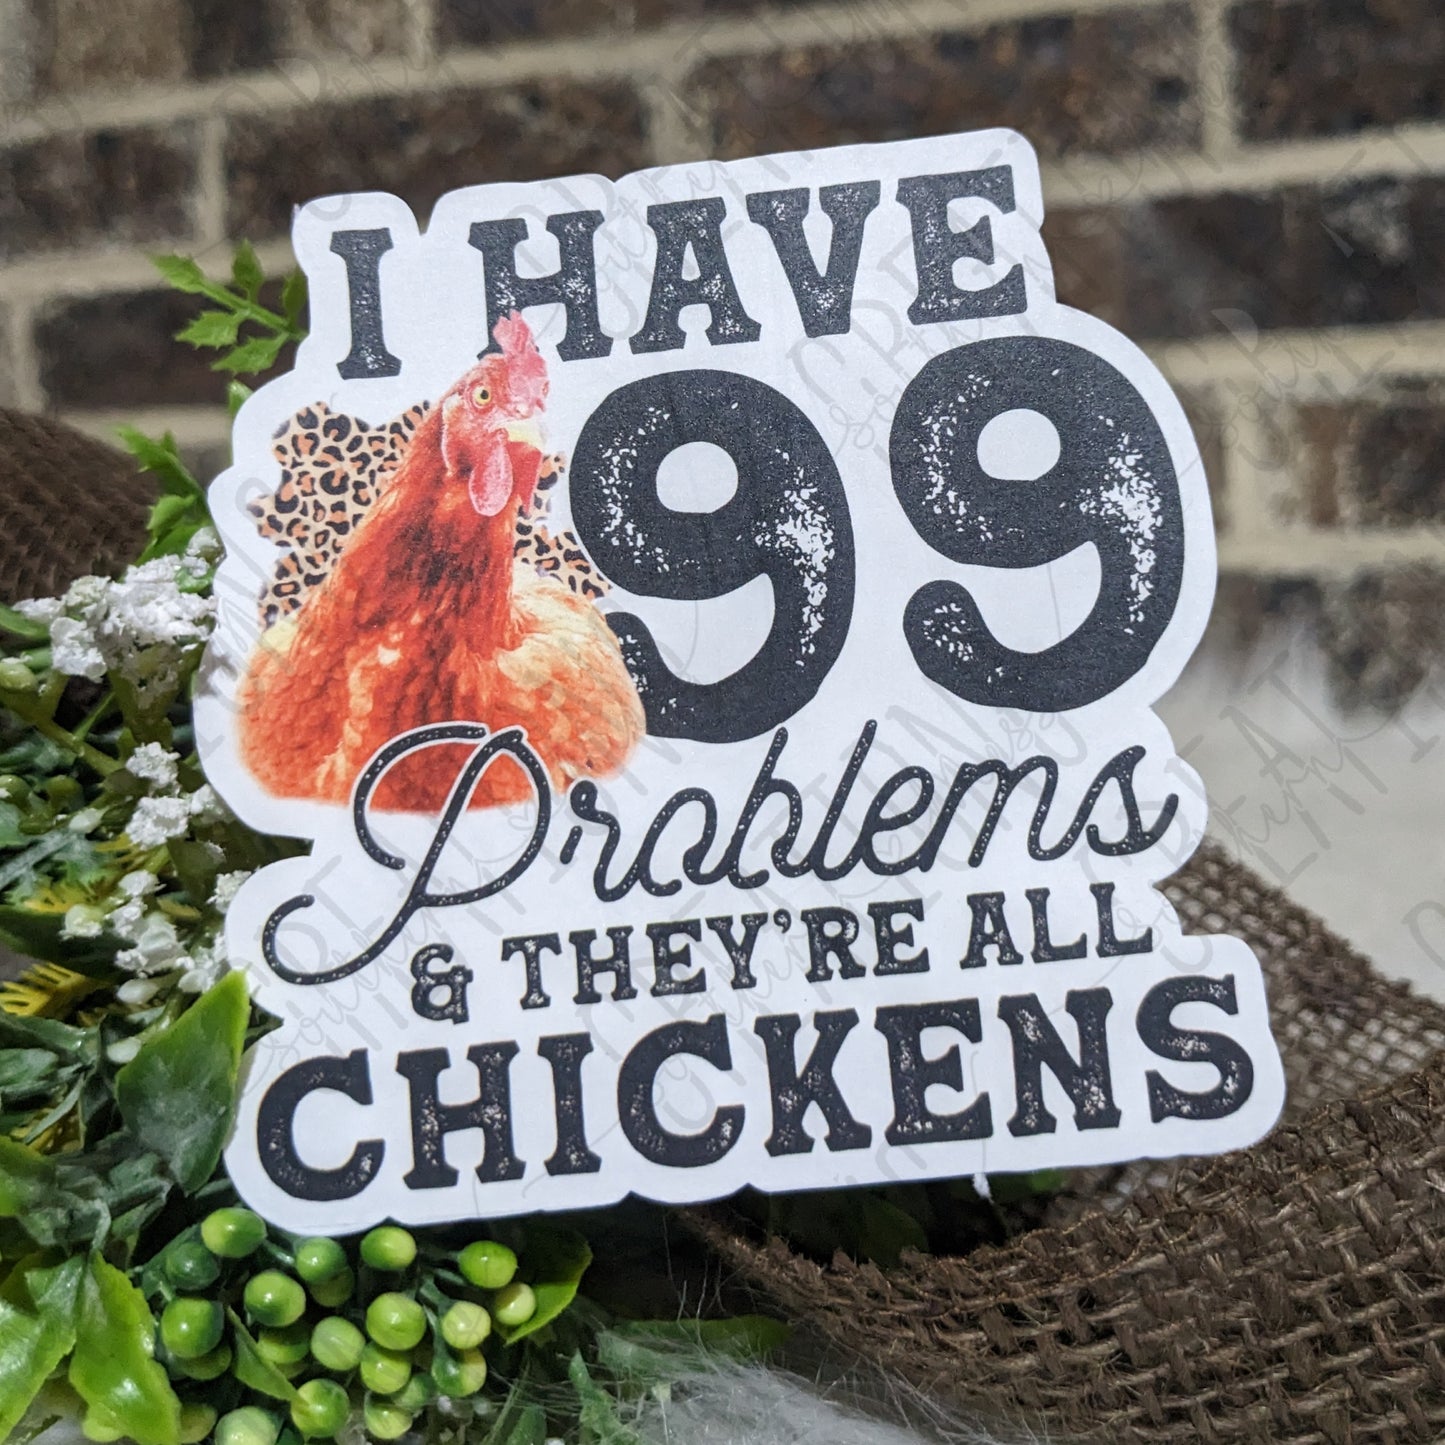 I Have 99 Problems & All Of Them Are Chickens